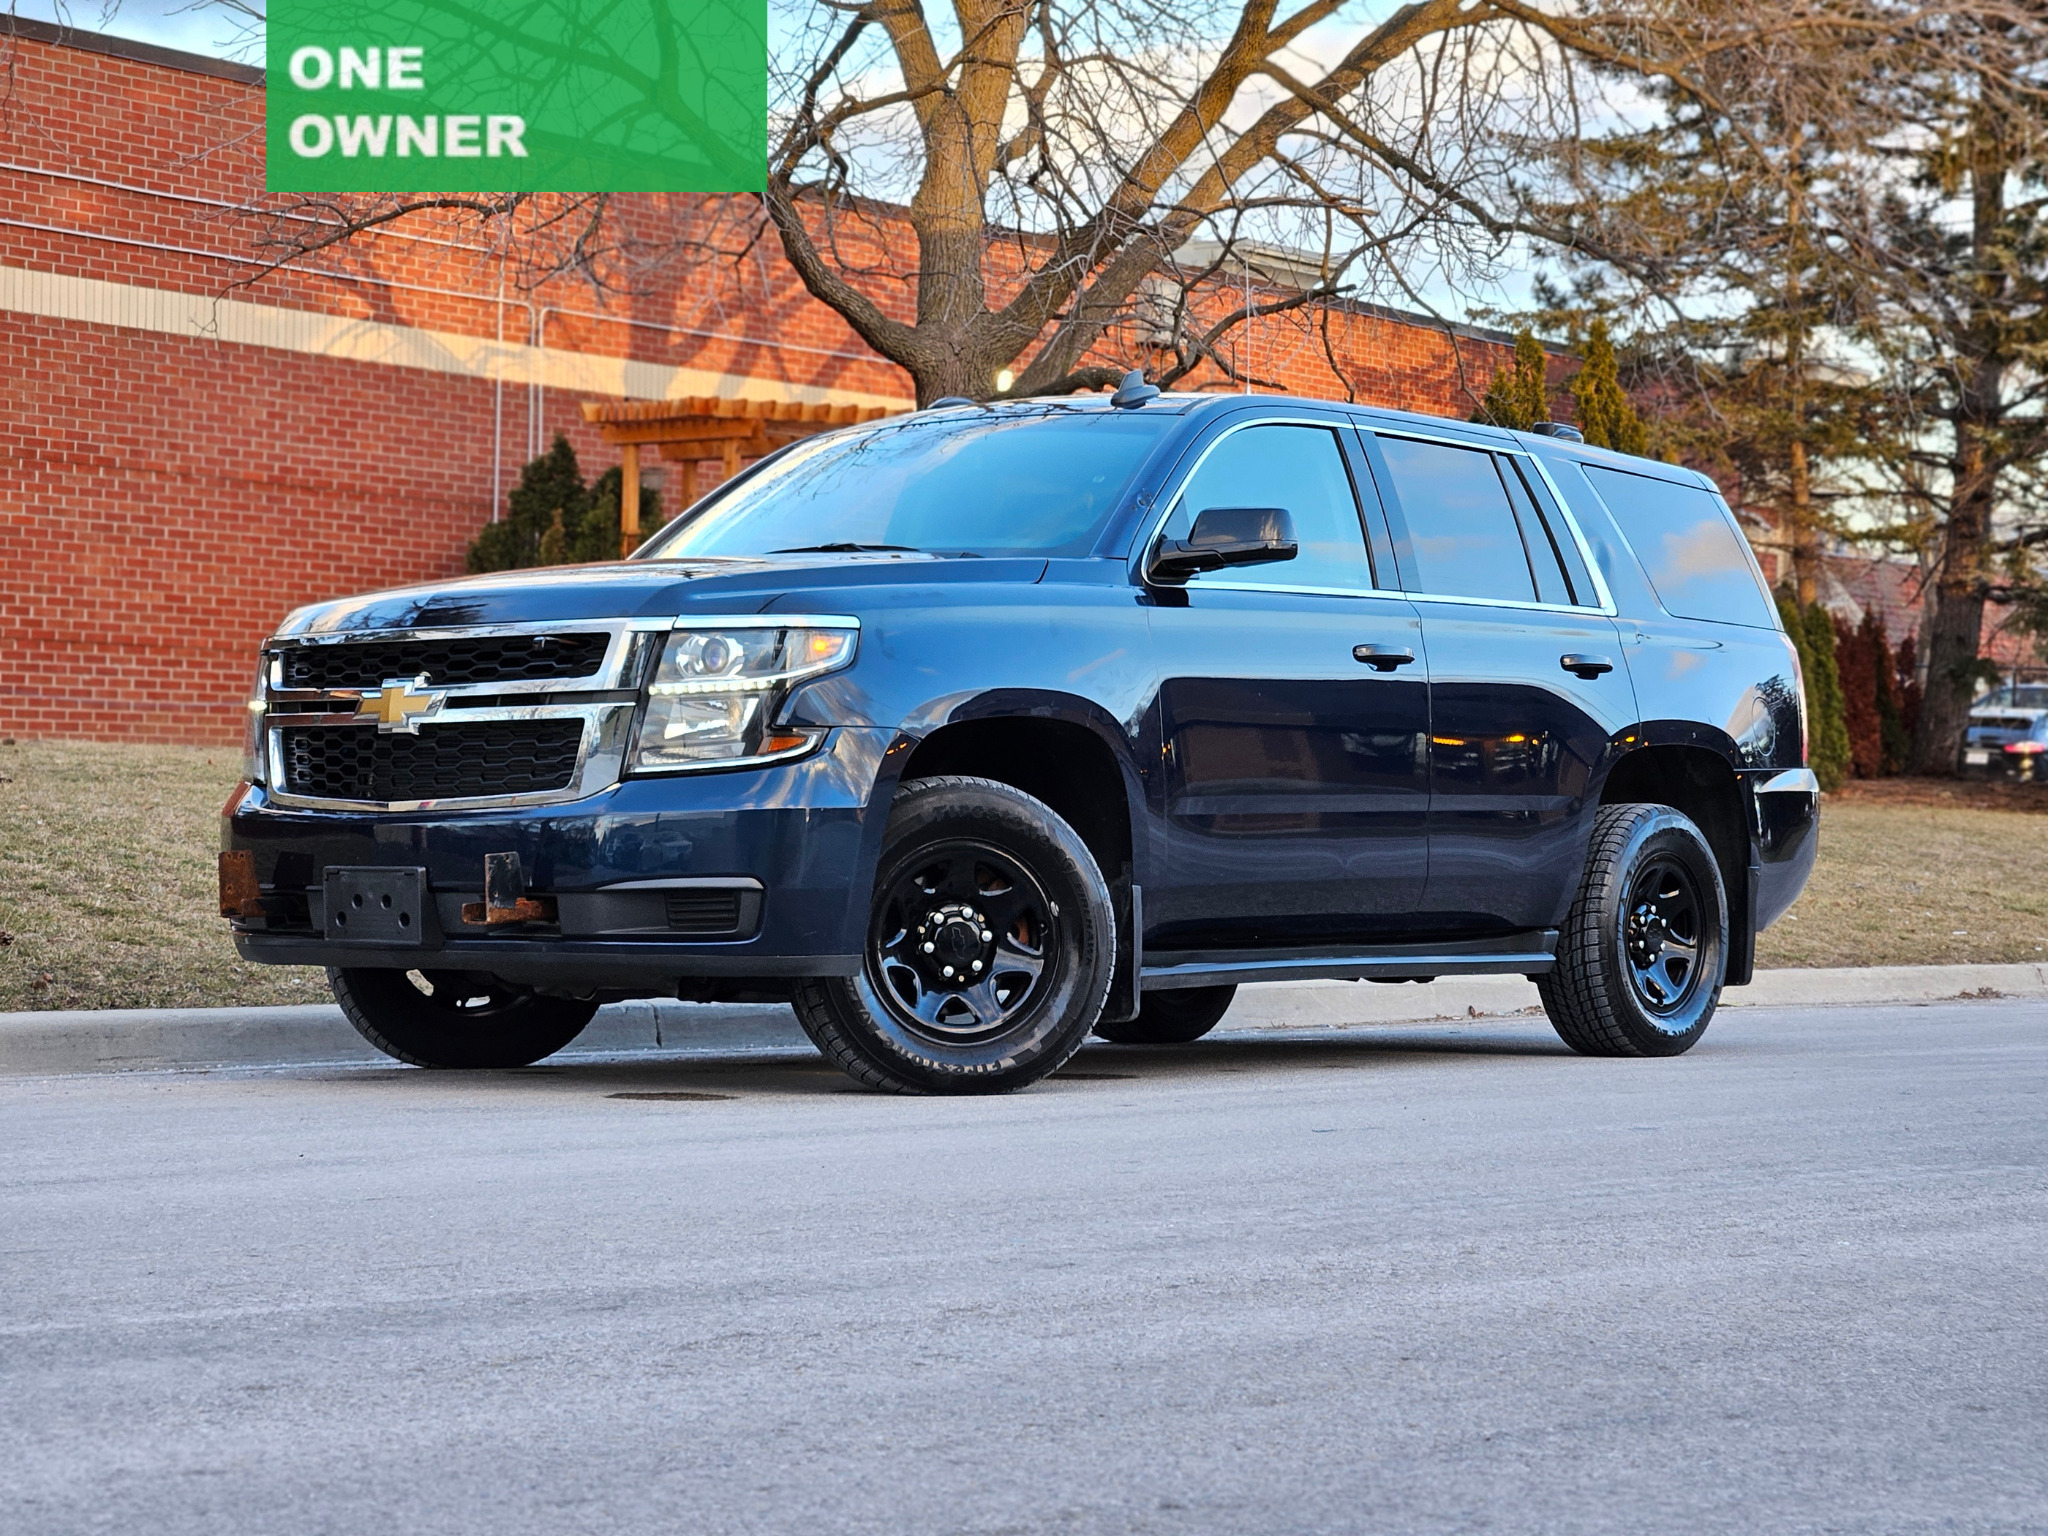 2016 Chevrolet Tahoe HARD to Find One Owner in Navy Blue & ONLY 199Km's